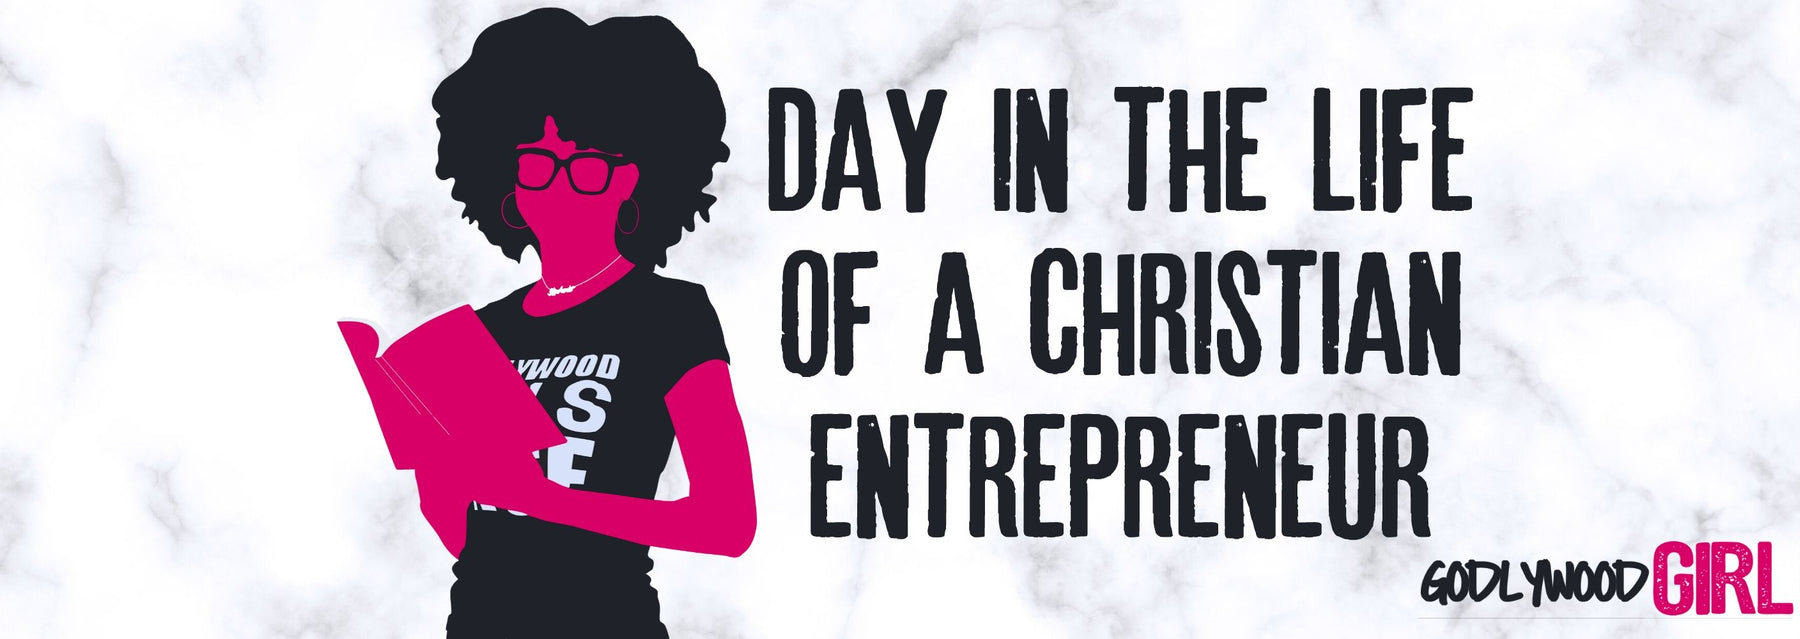 Day In The Life Of A Christian Entrepreneur Ep.15 | Art Of The Sea Event w/ Danni Washington